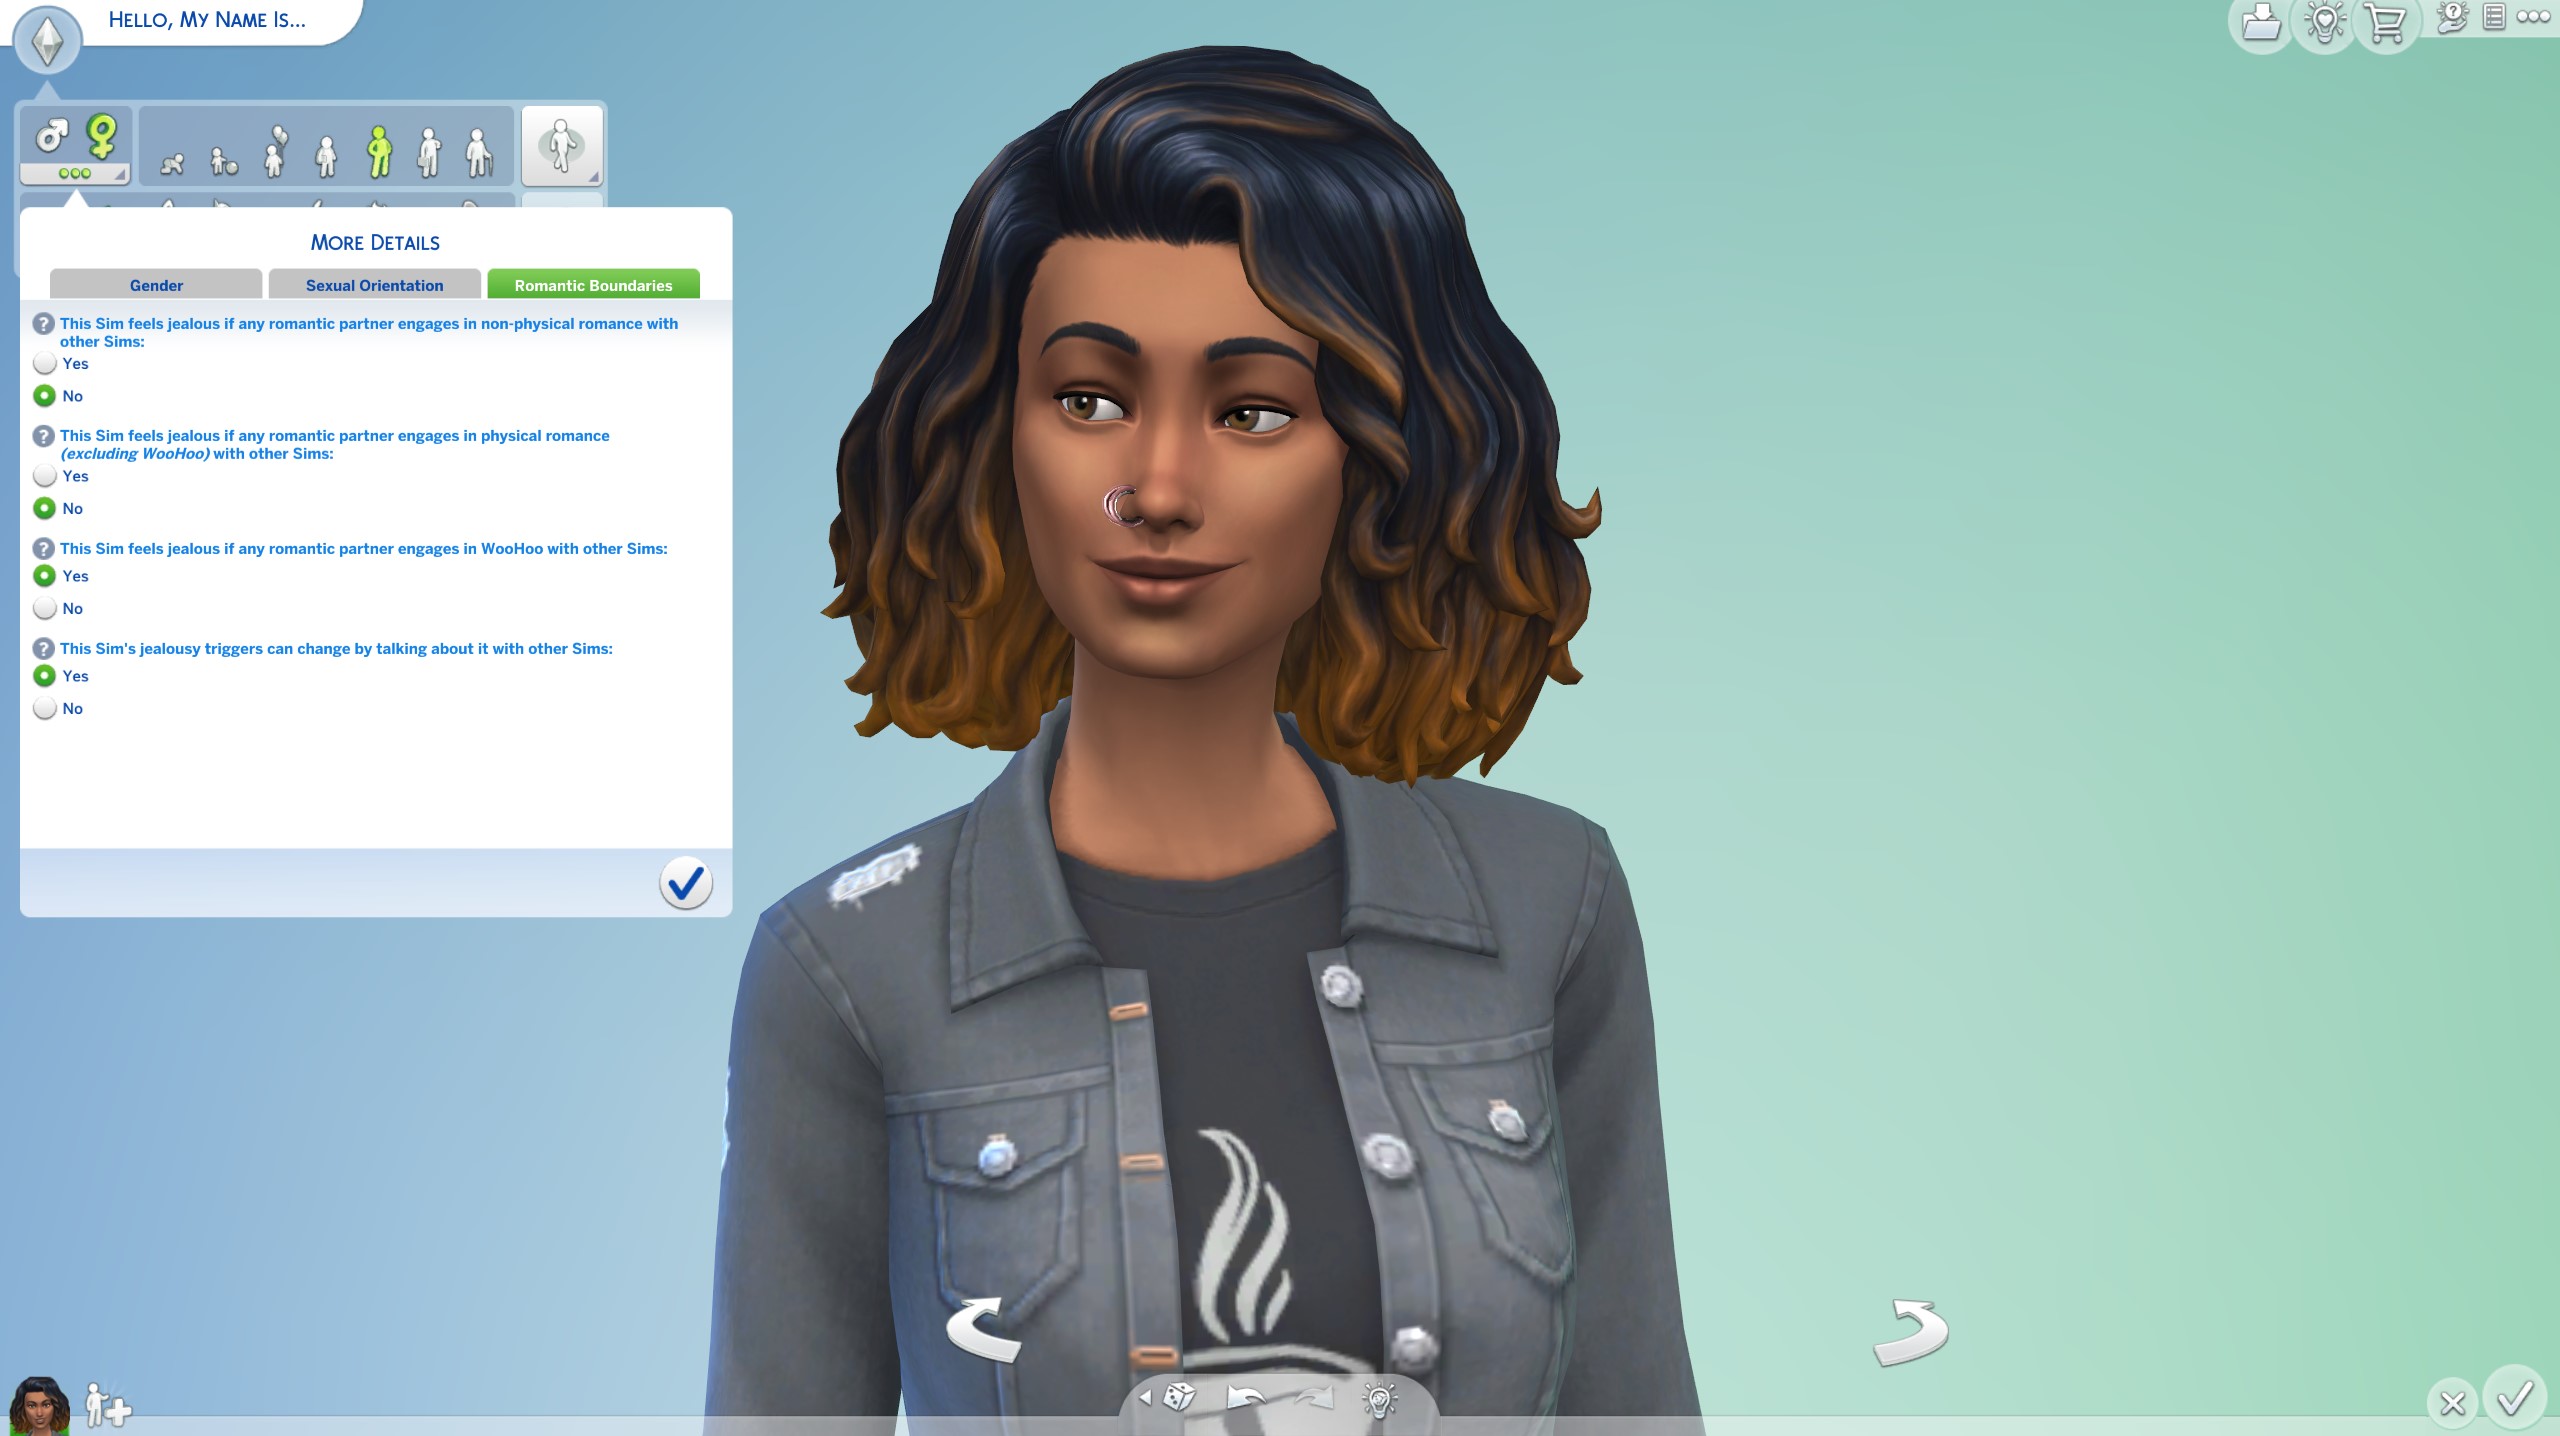 The Sims 4 - Romantic Boundaries menu in Create-A-Sim showing whether a Sim feels jealousy at their partner expressing intimacy with other Sims.